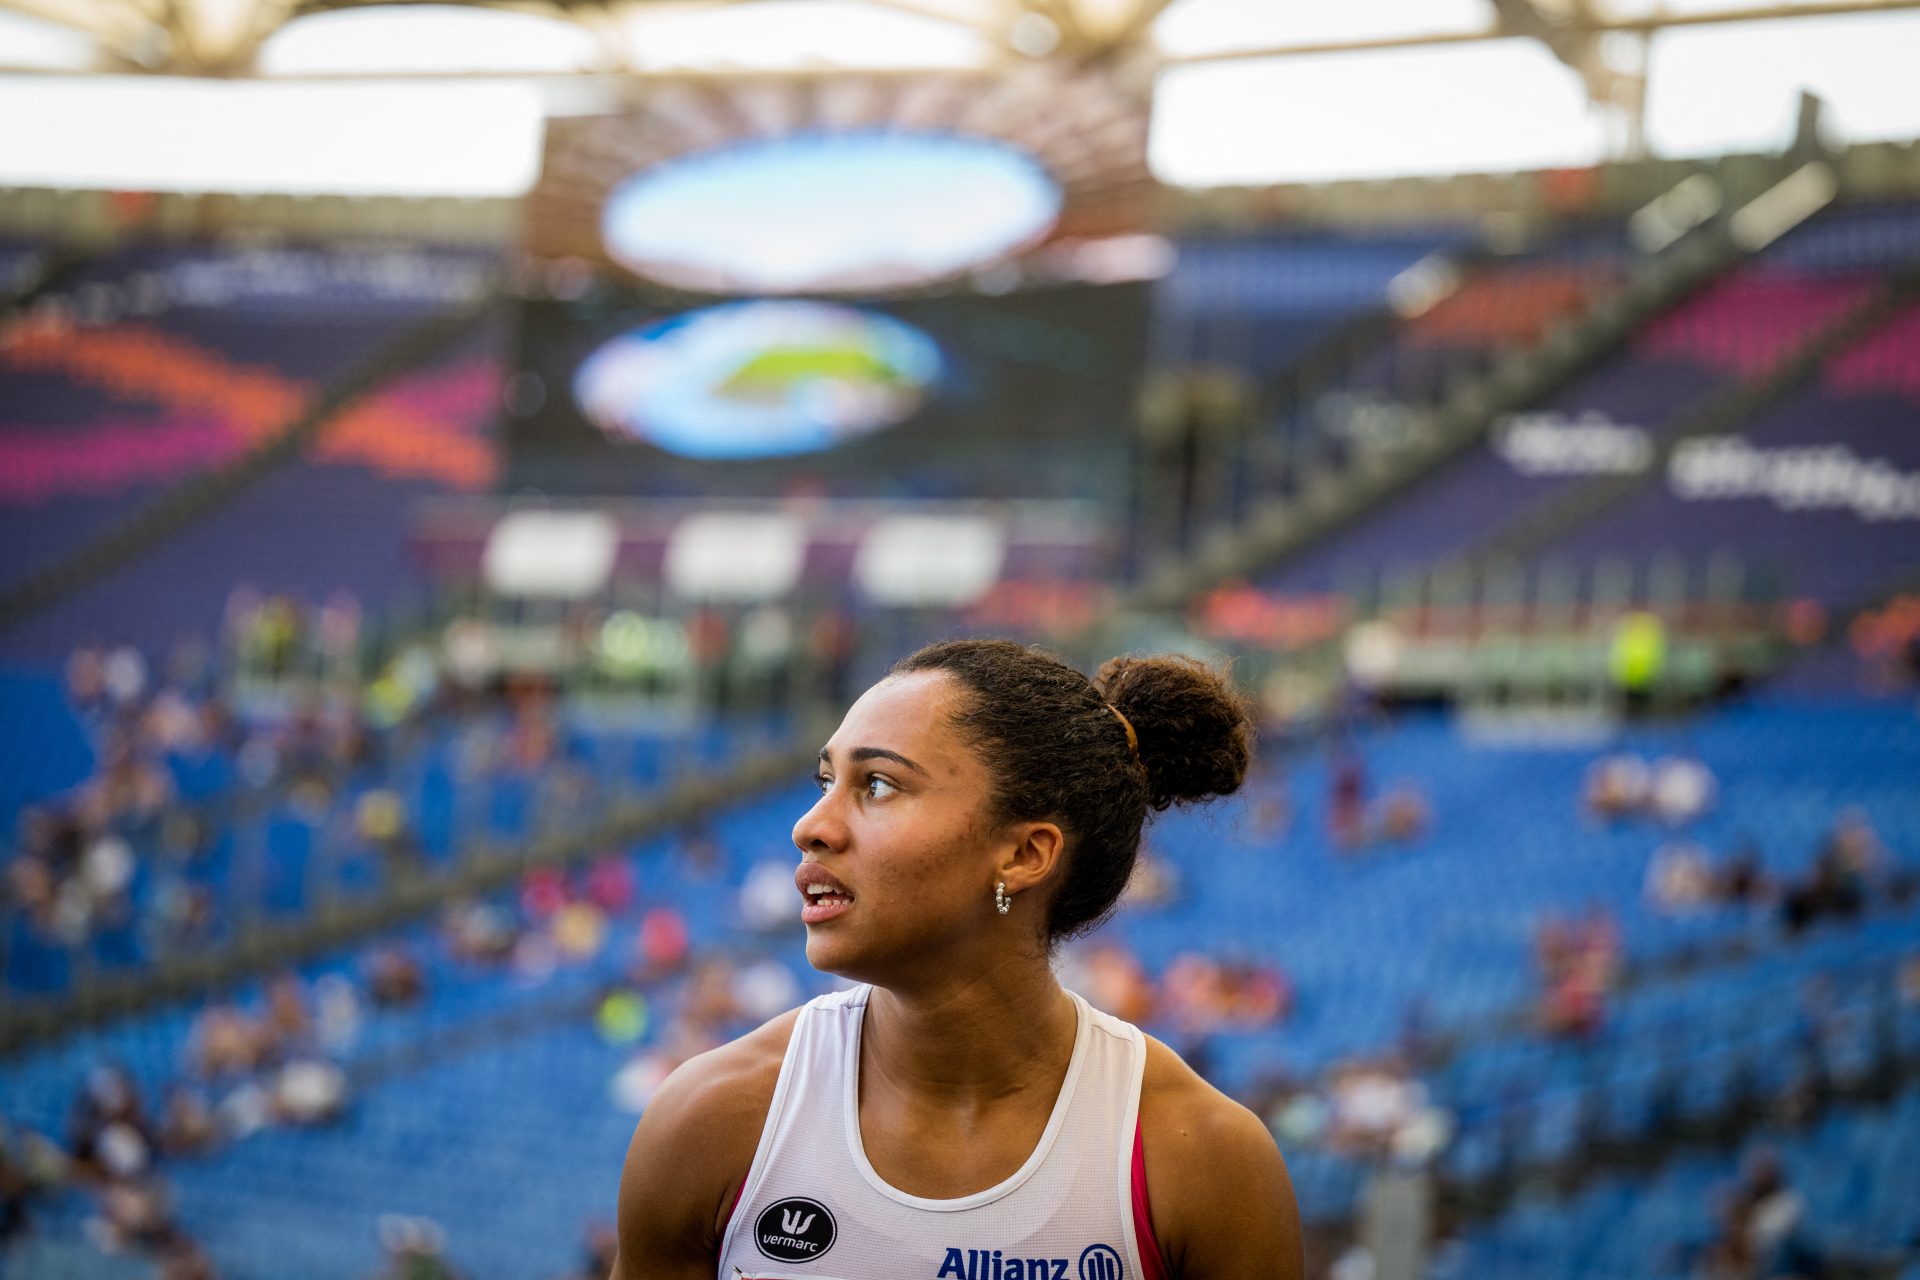 Belgian athlete excluded from European Championships final for bizarre reason: 